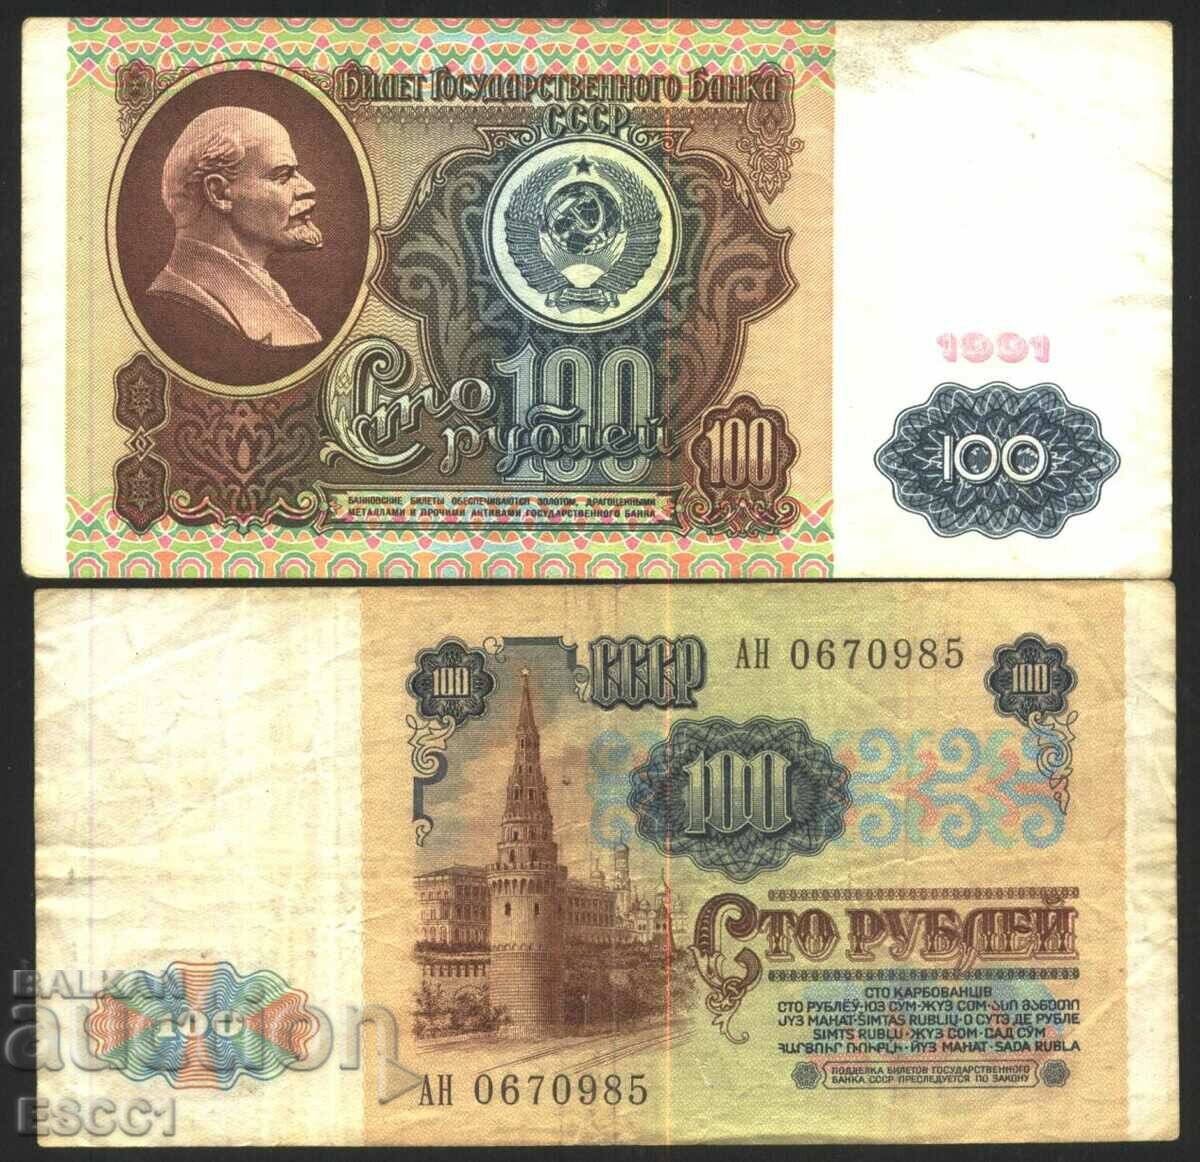 Banknote 100 rubles 1991 from the USSR